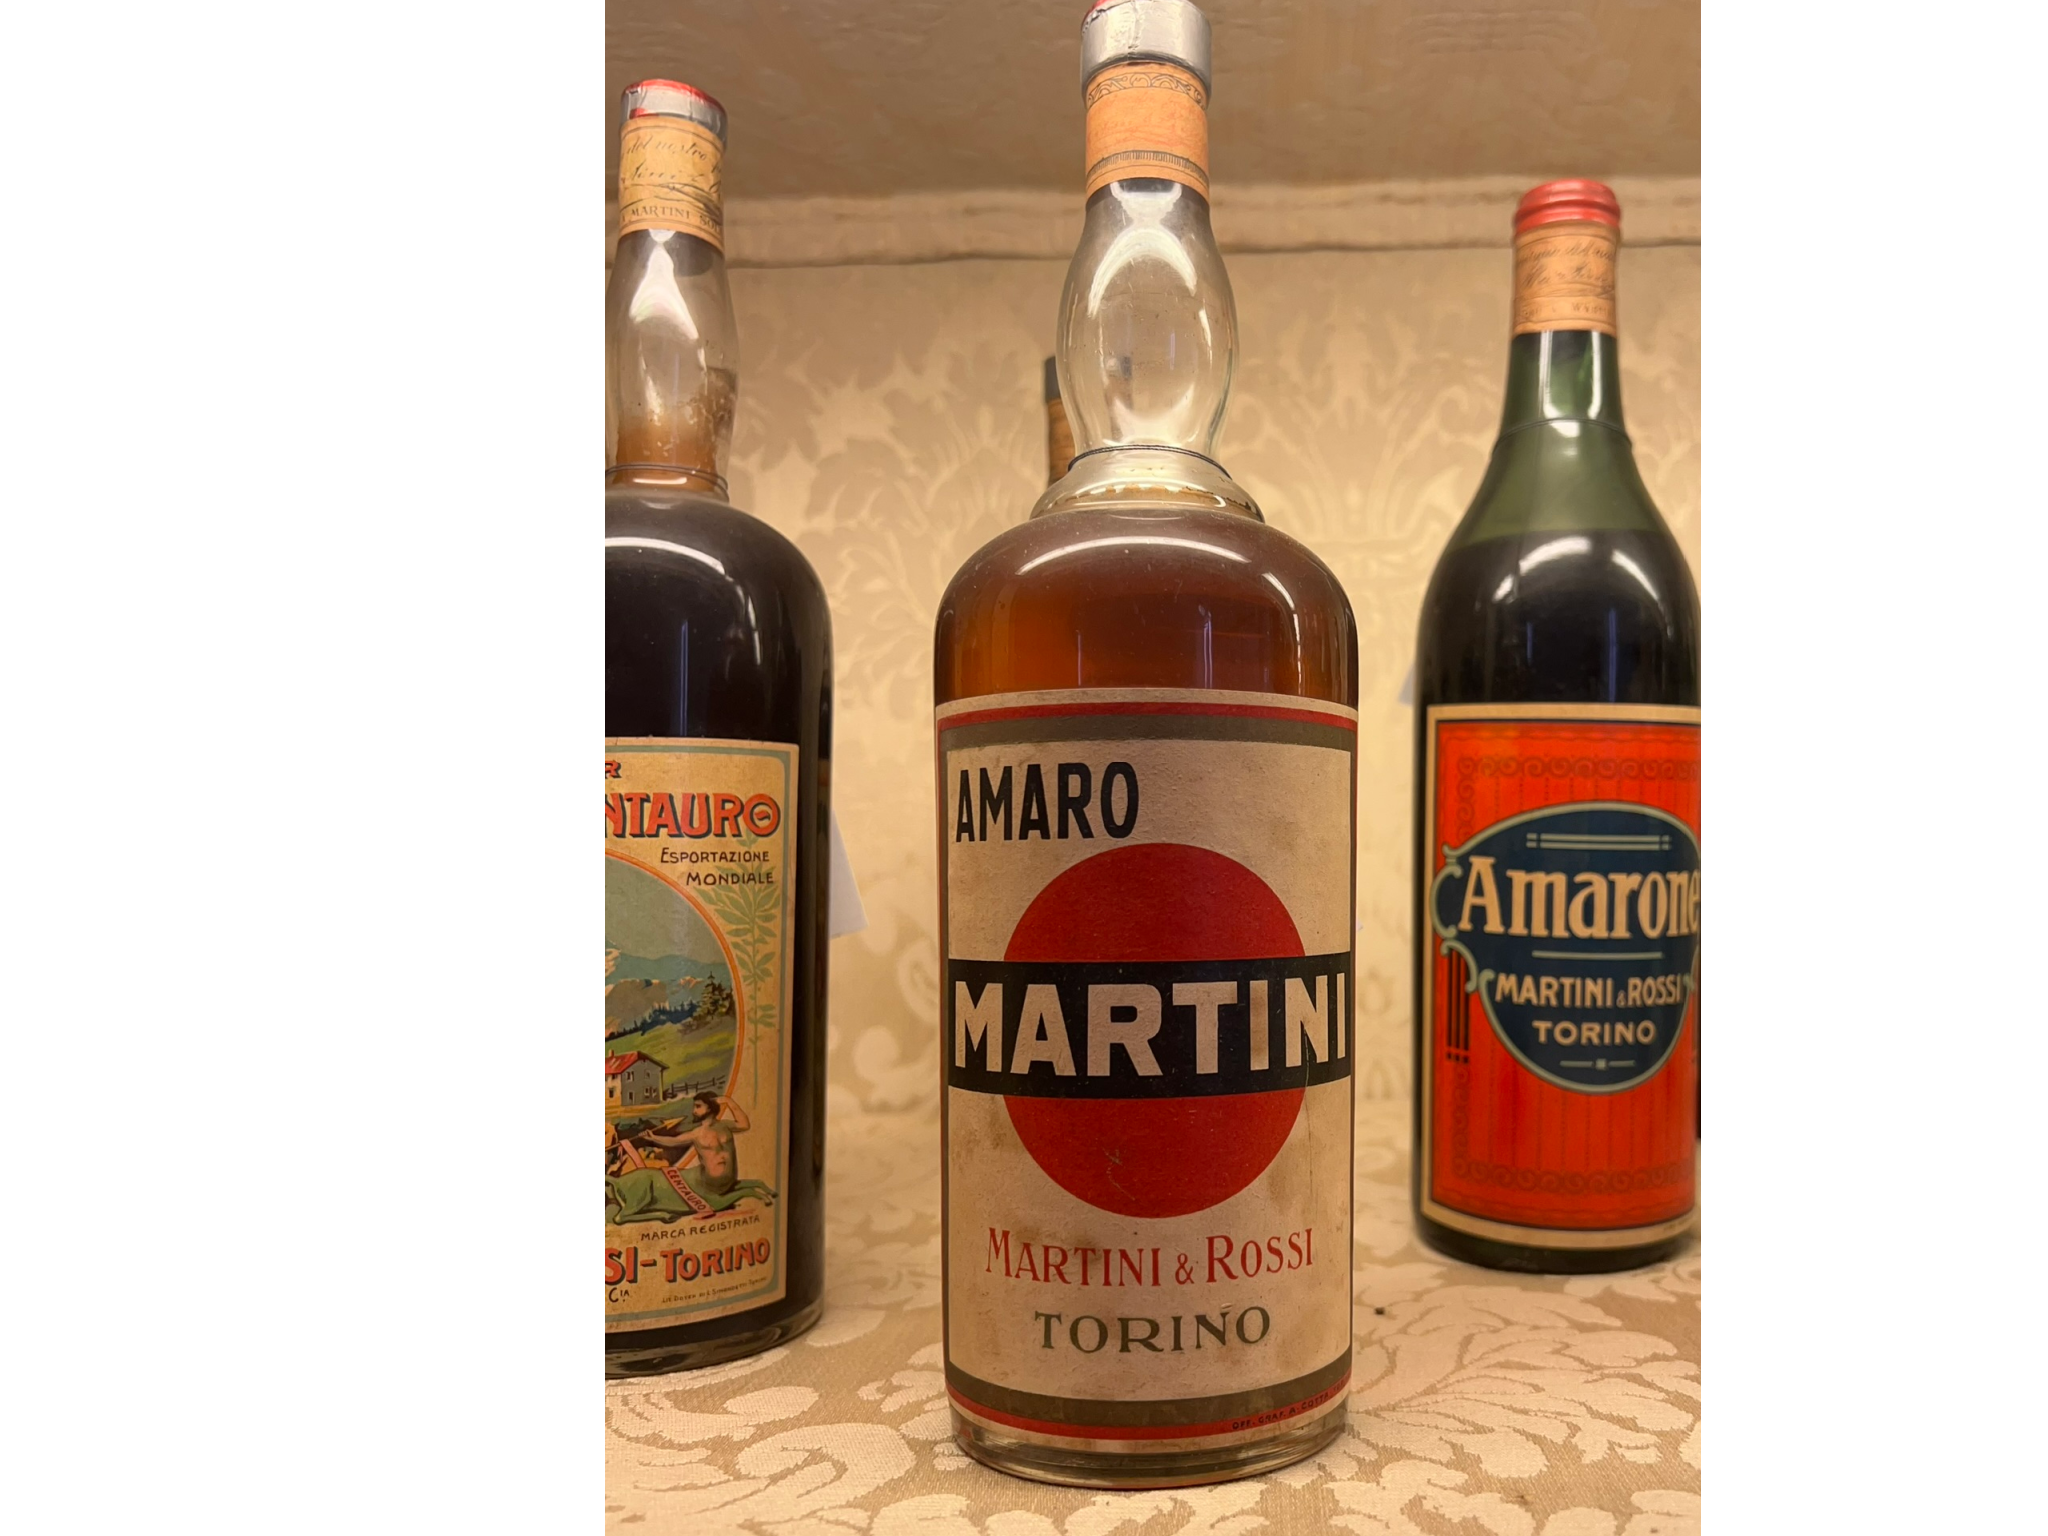 There’s a huge selection of vermouth to try at the world-famous Casa Martini